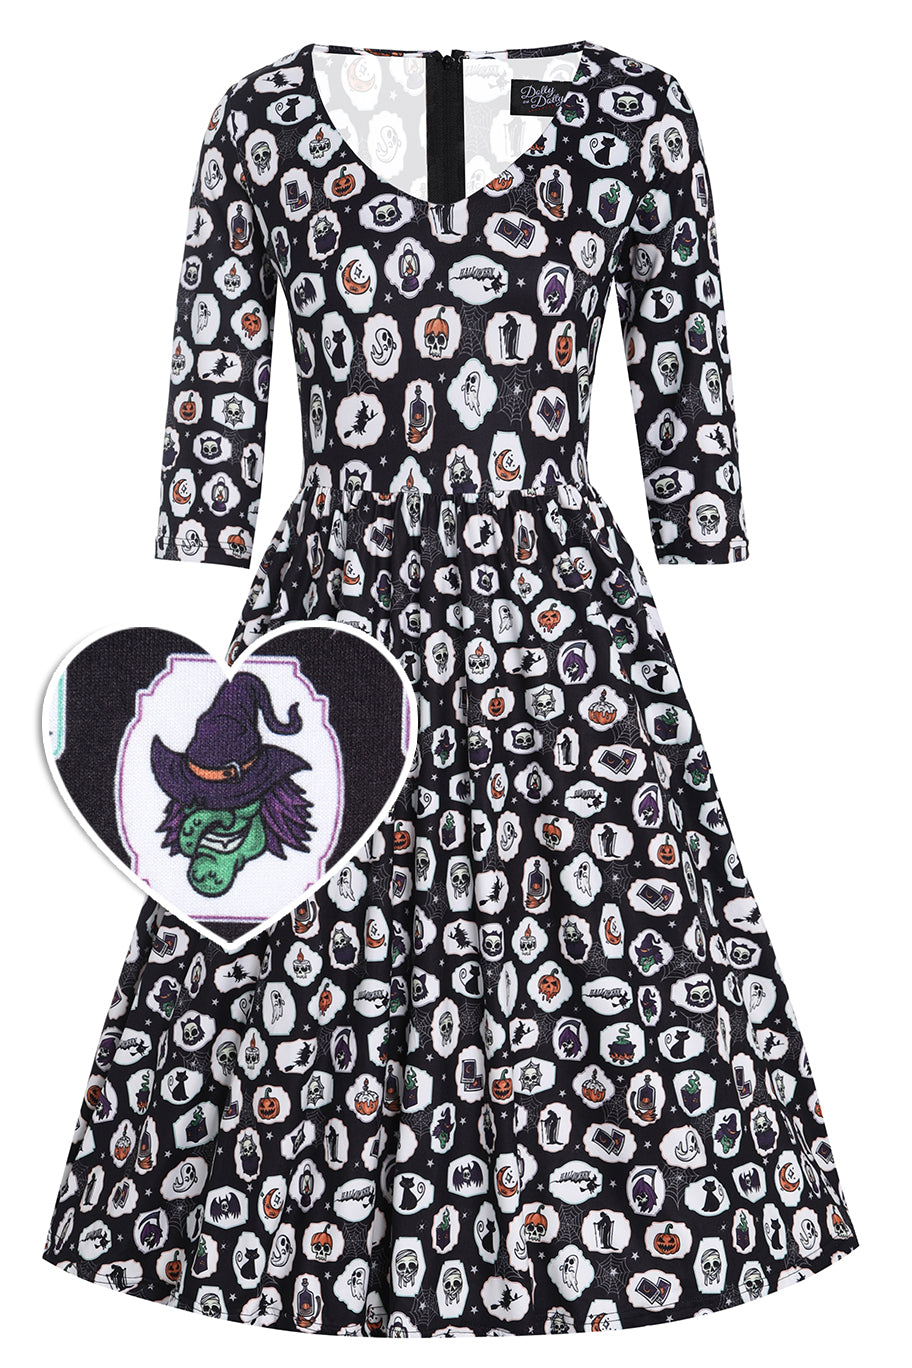 Front View of Black with Spooky Halloween Print Long Sleeved Swing Dress